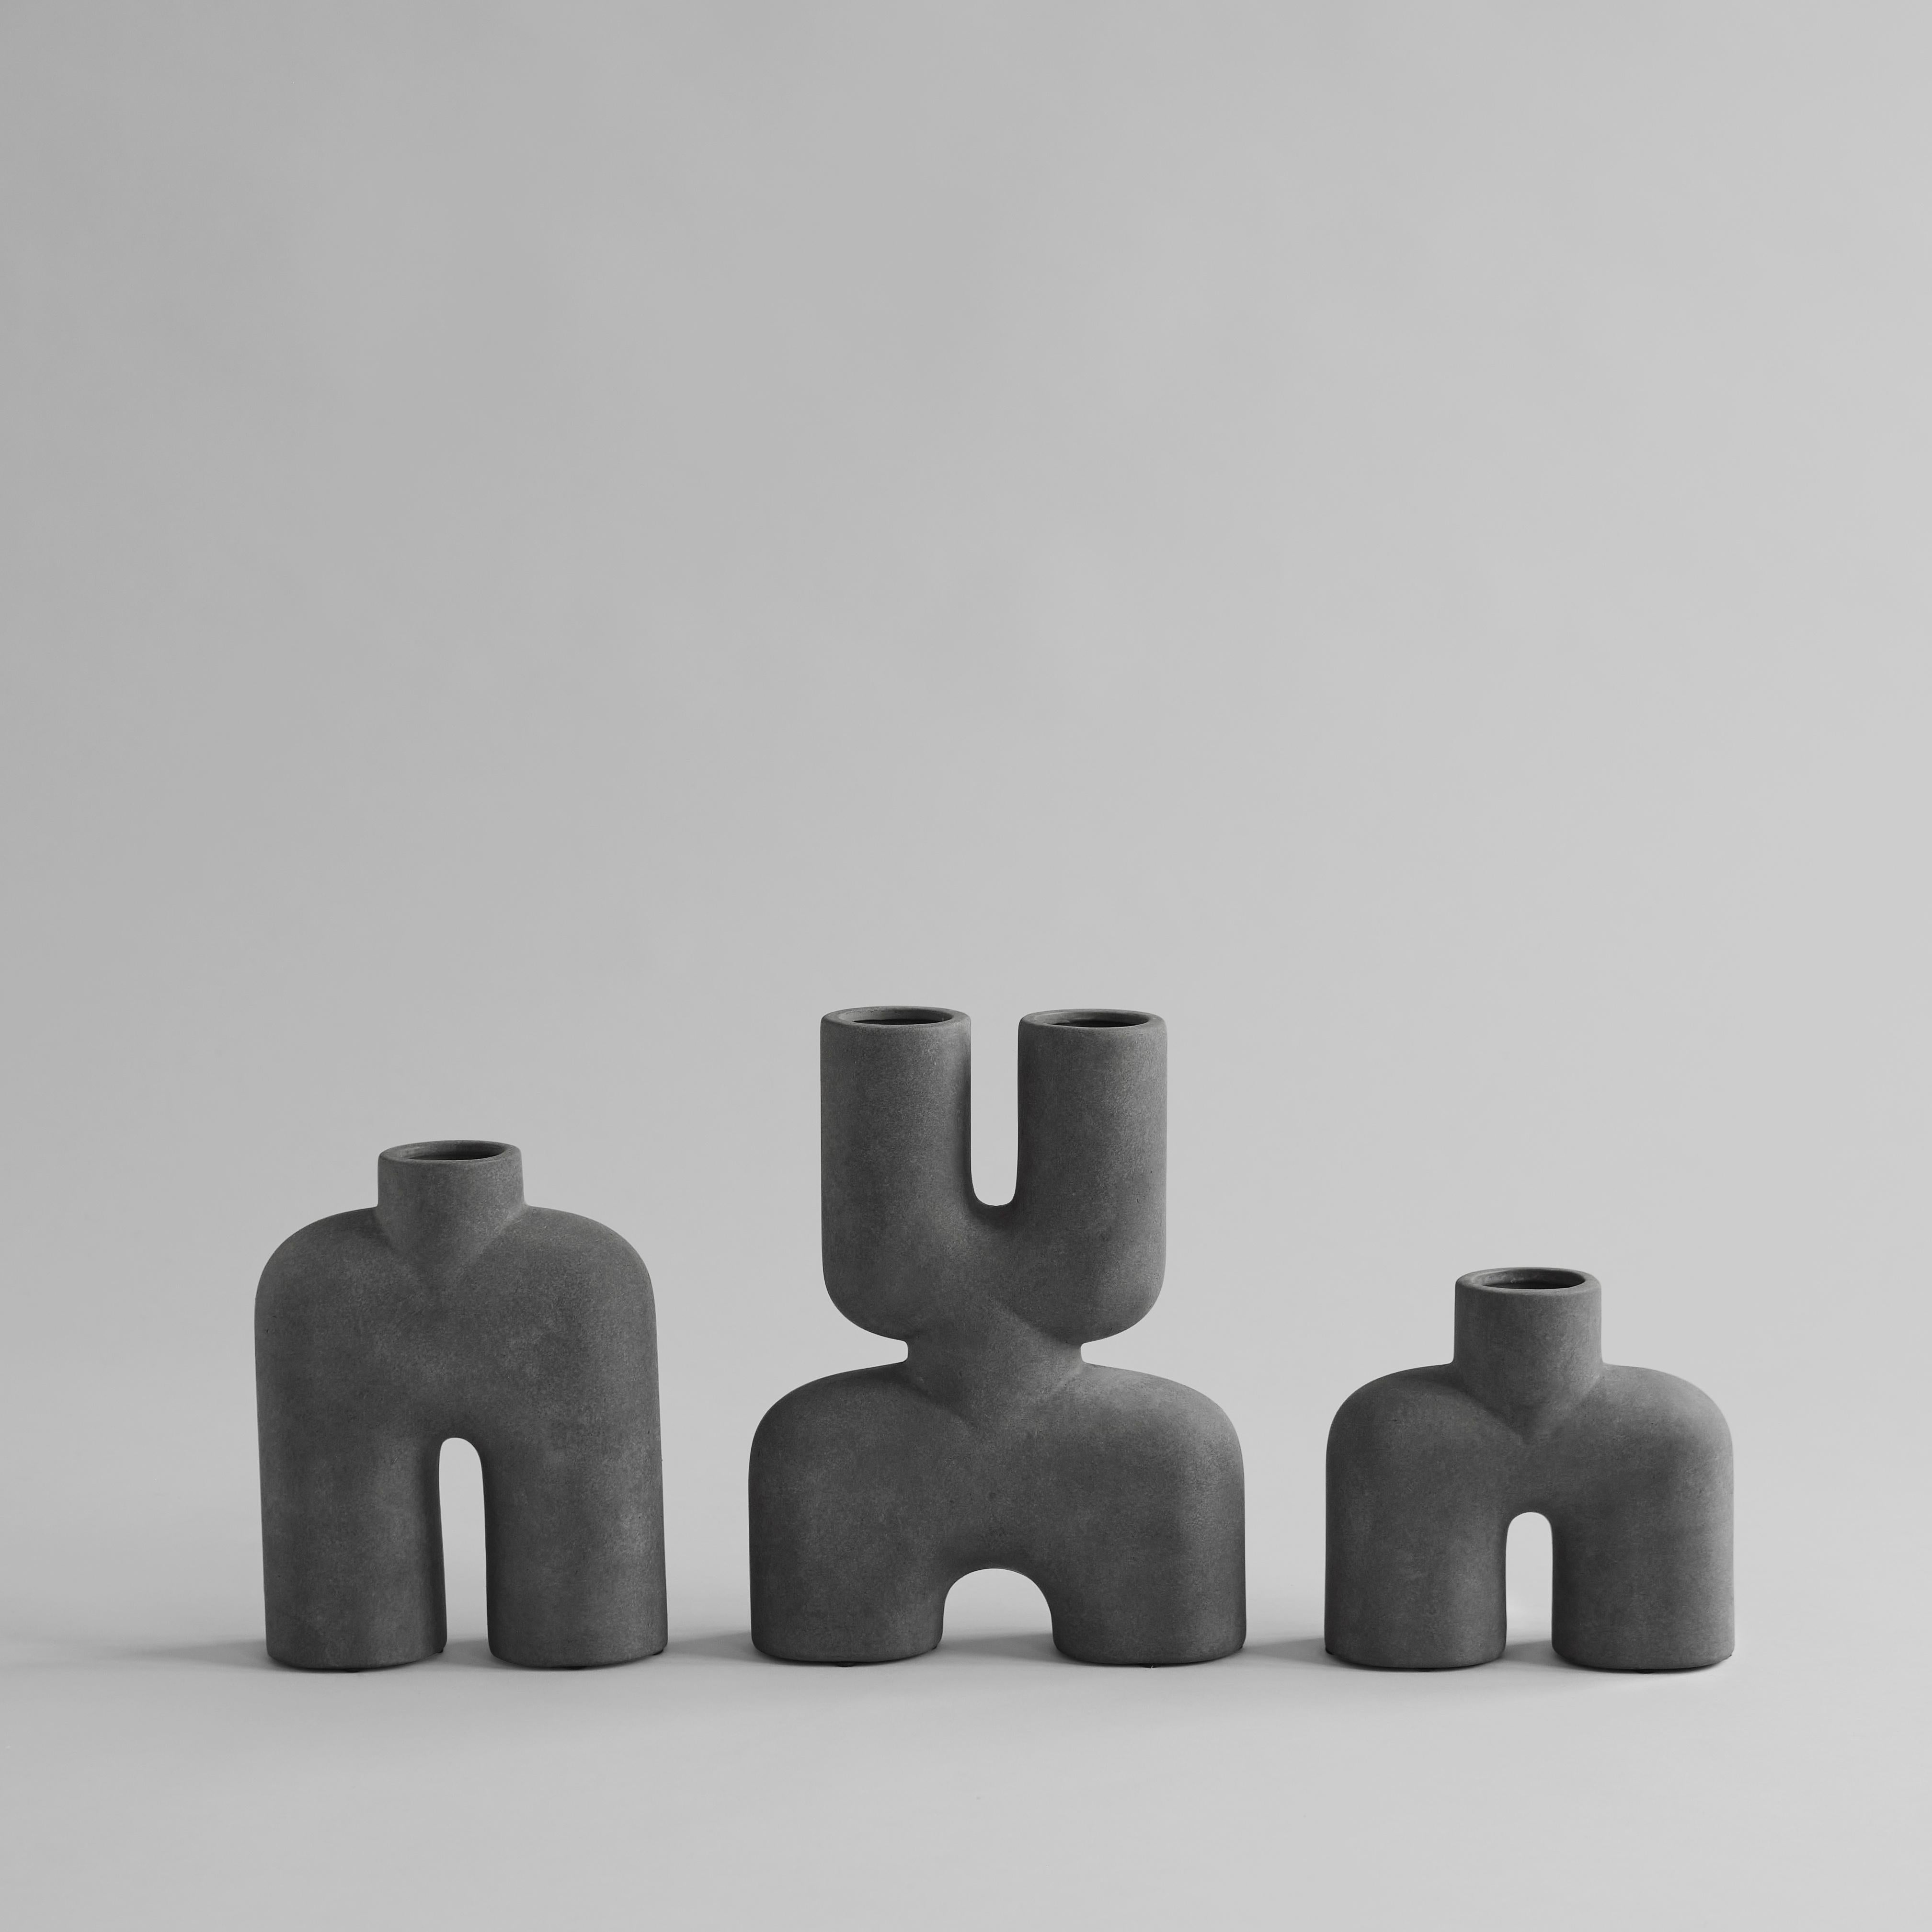 A set of 2 dark grey cobra tall mini by 101 Copenhagen.
Designed by Kristian Sofus Hansen & Tommy Hyldahl.
Dimensions: L 18 / W 6.5 / H 23 cm.
Materials: Ceramic.

A tribute to the Cobra Arts Movement of the 1960s, the collection is the epitome